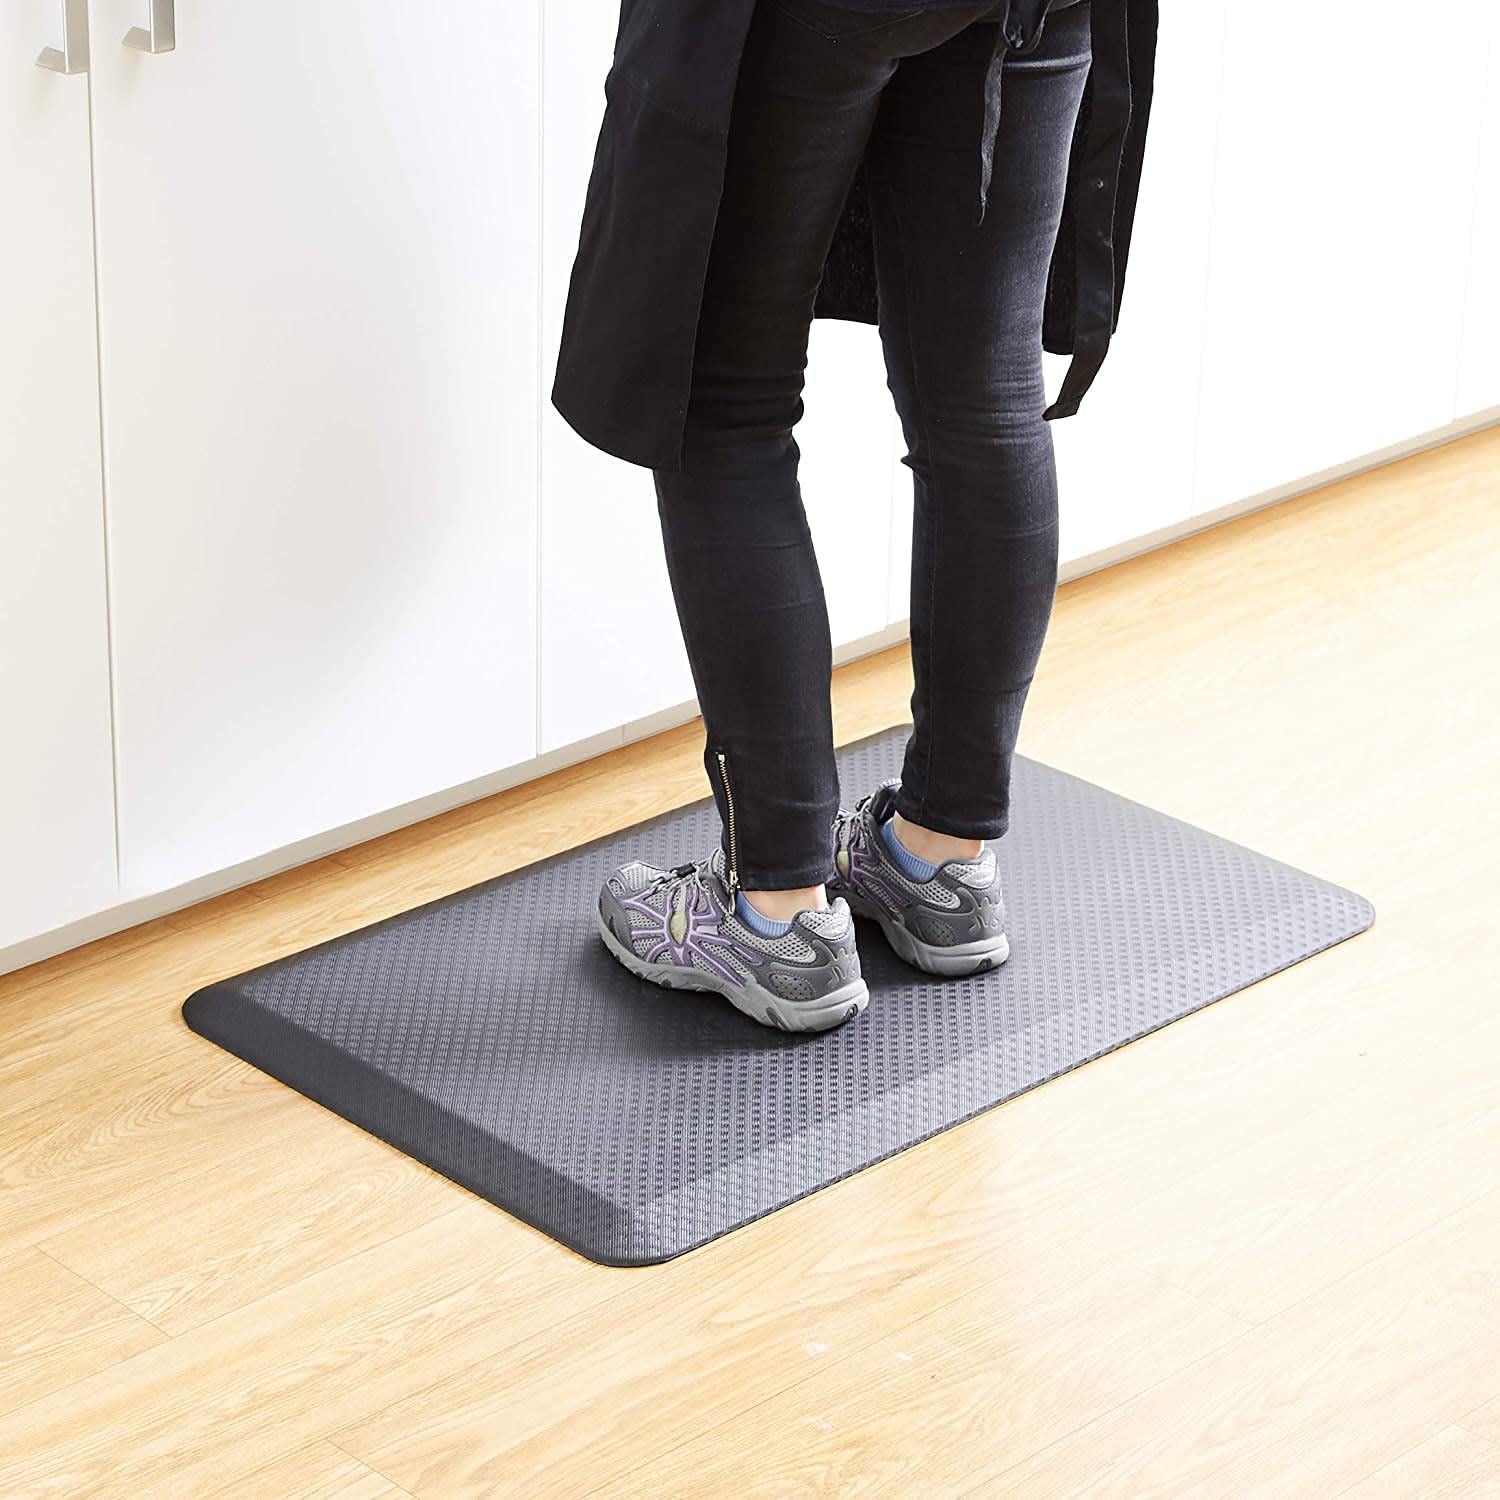 http://cdn.apartmenttherapy.info/image/upload/v1679675470/gen-workflow/product-database/amazon-commercial-anti-fatigue-ergo-comfort-standing-mat.jpg